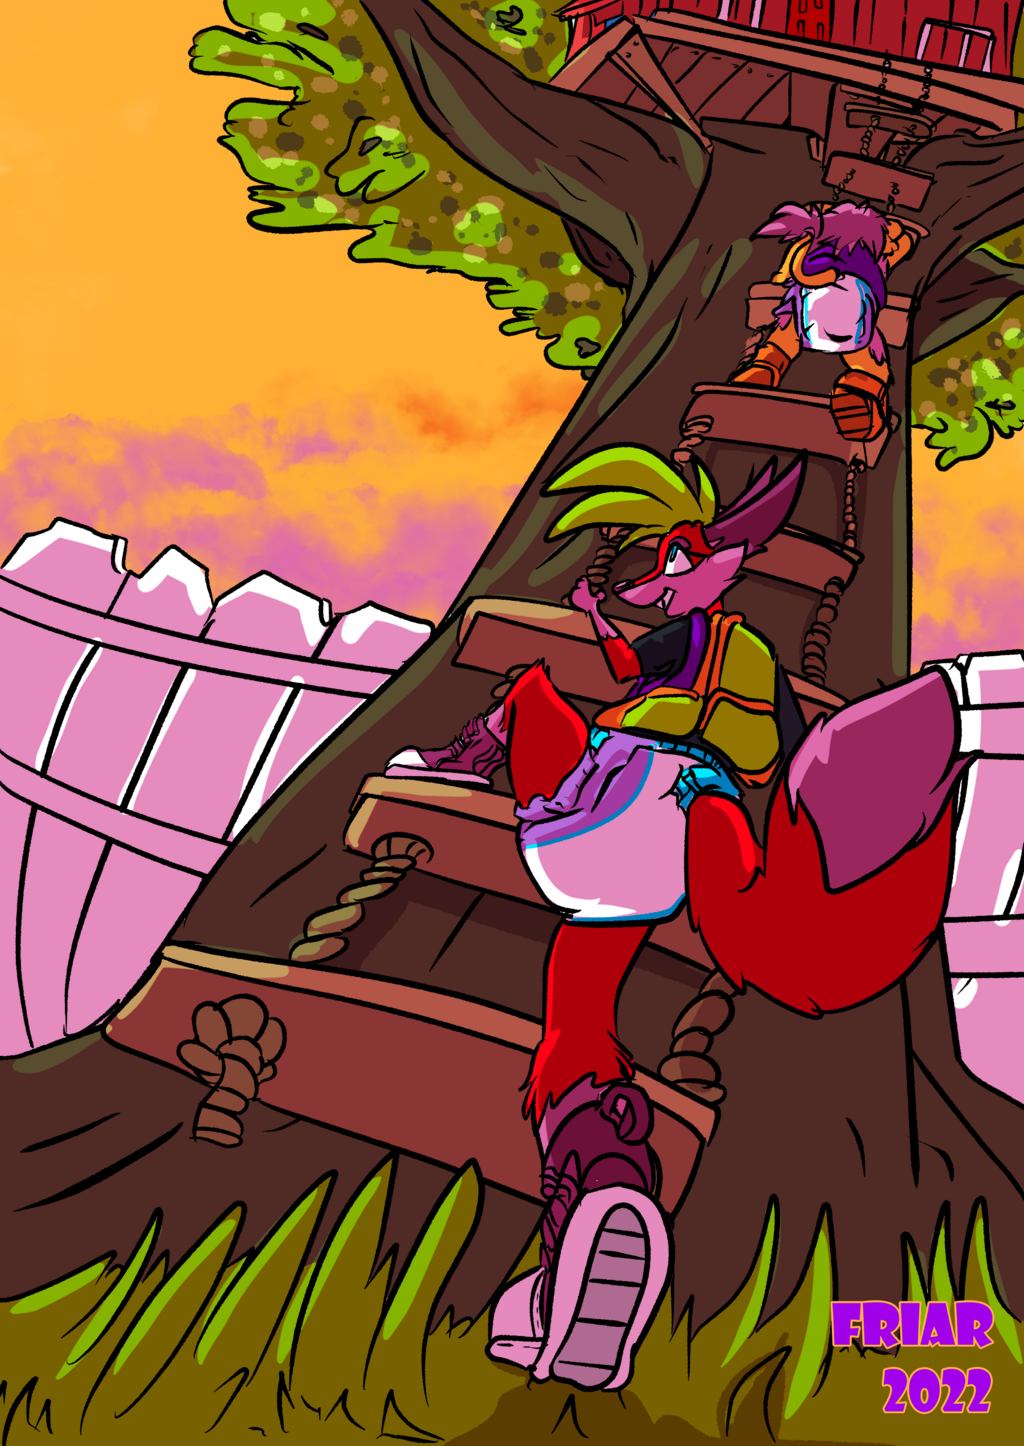 Most recent image: Up In The Trees